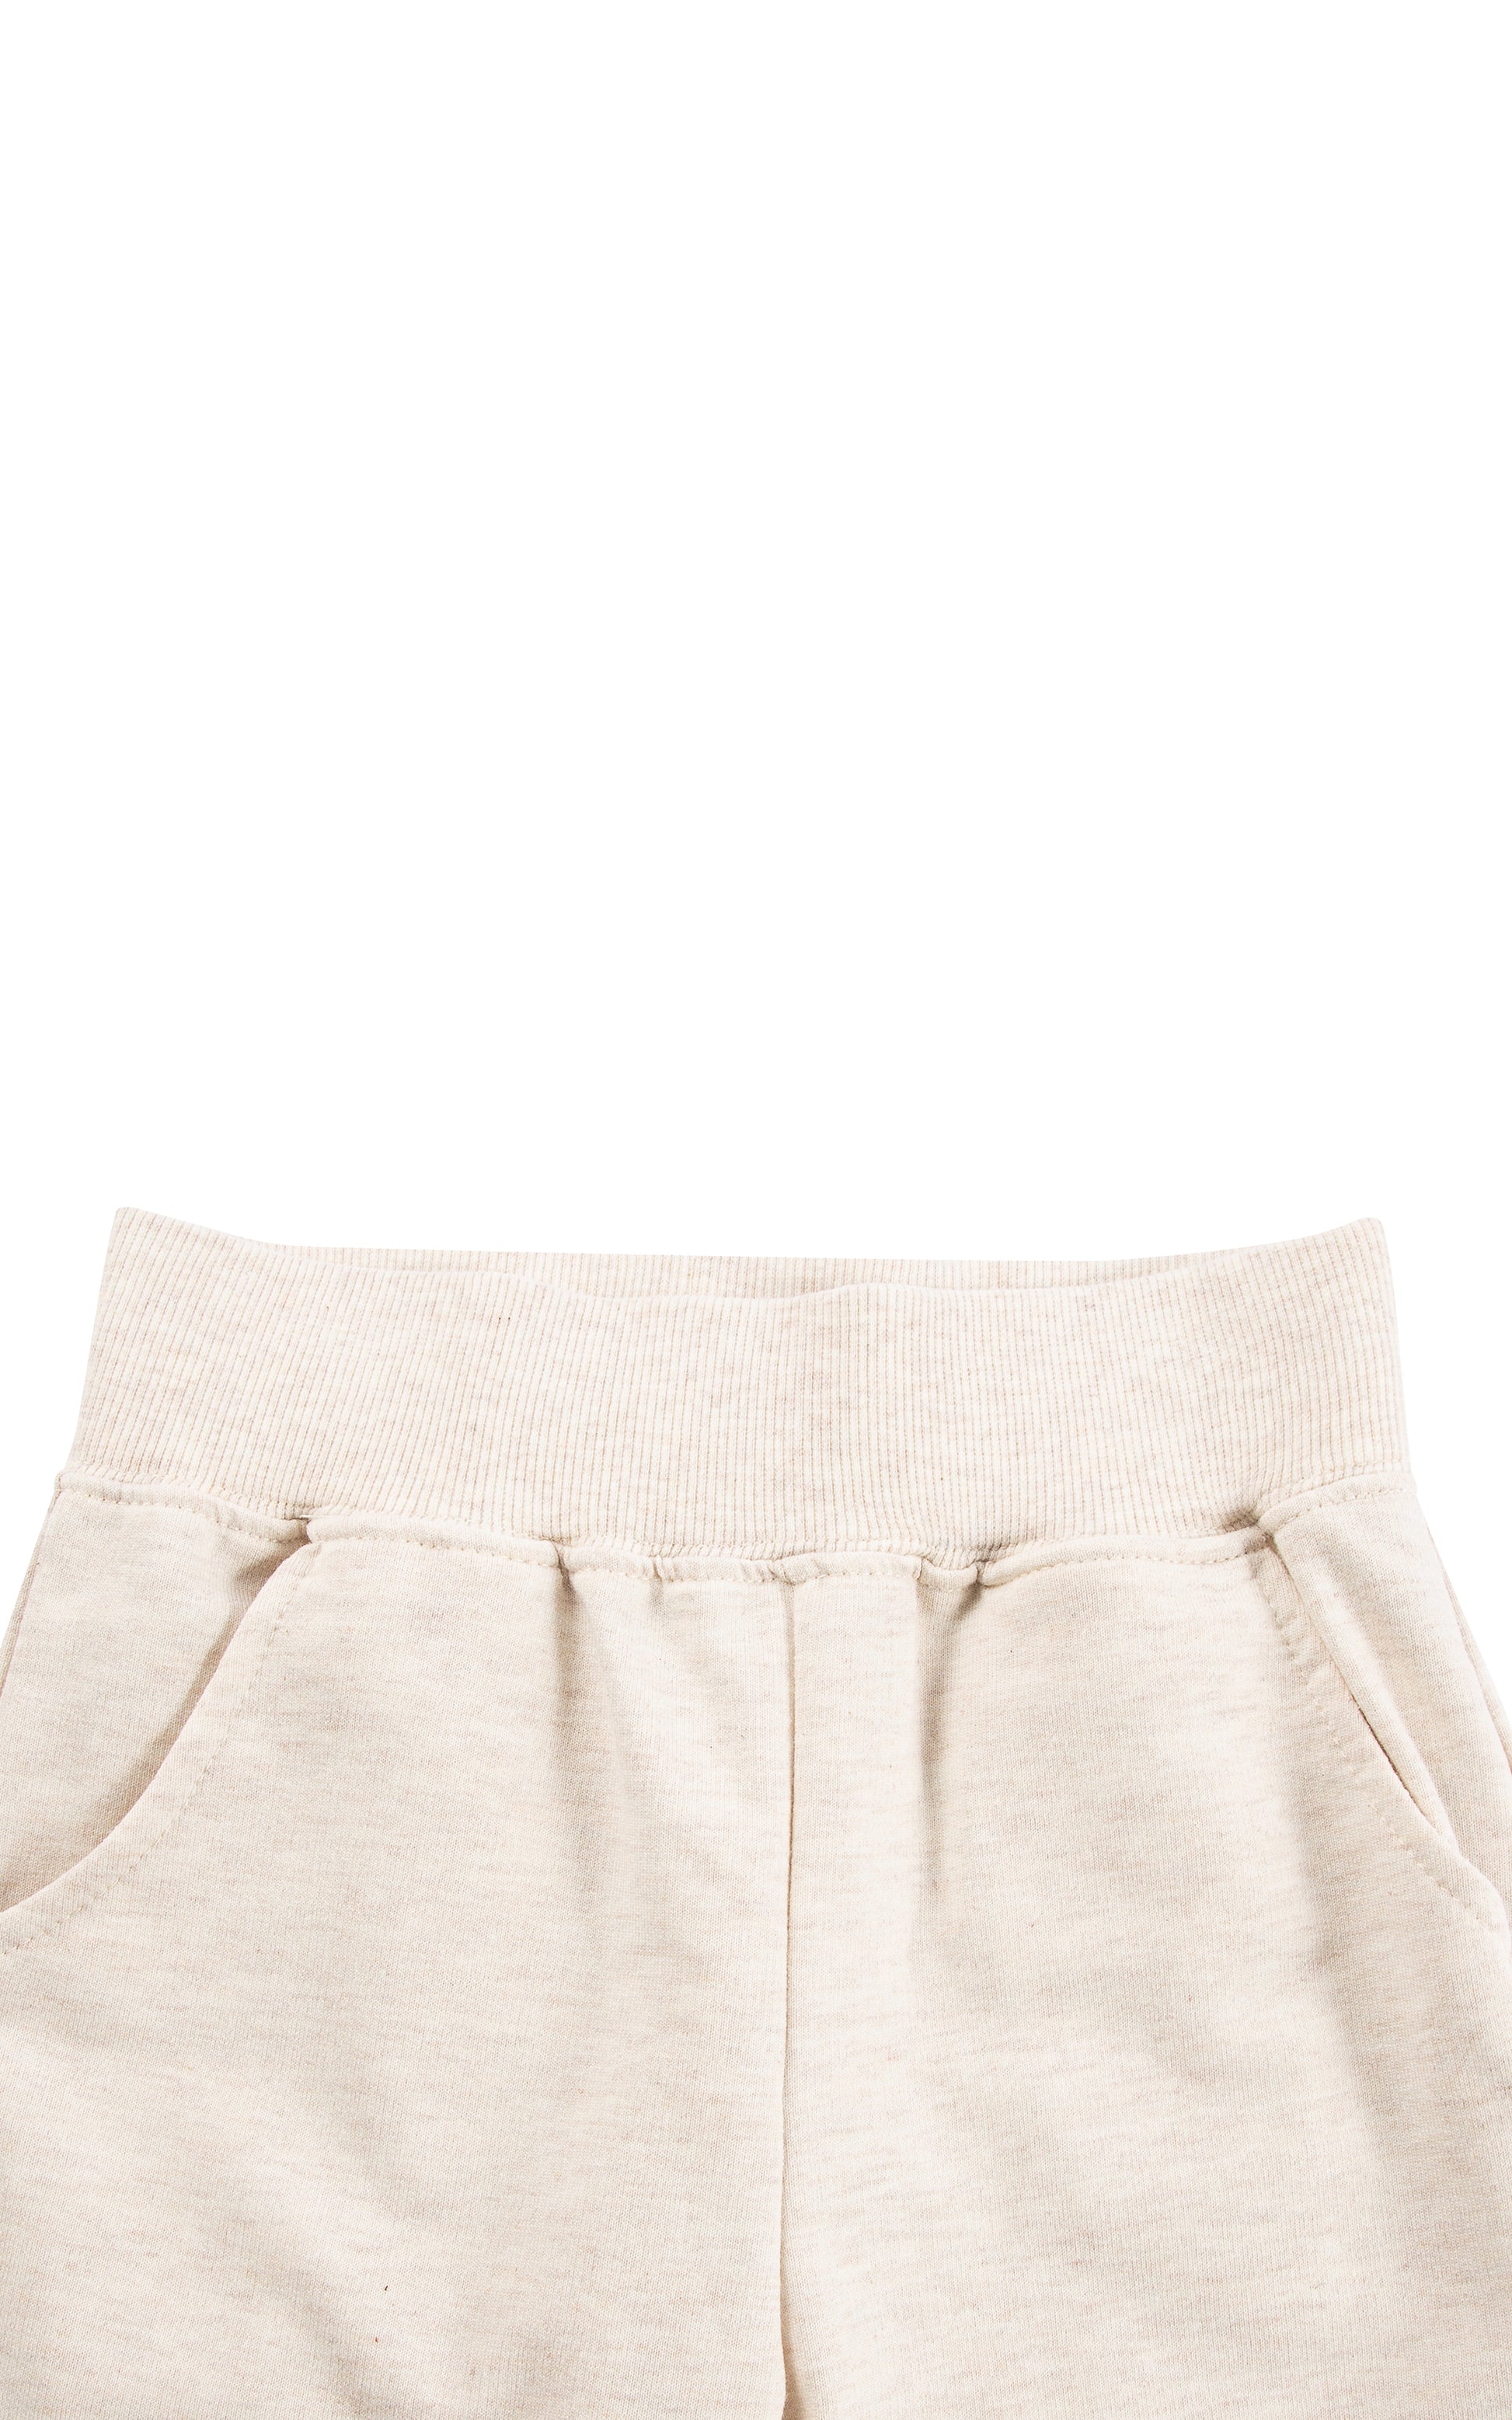 Close up of light beige sweatpants with wide elastic ribbed waistband